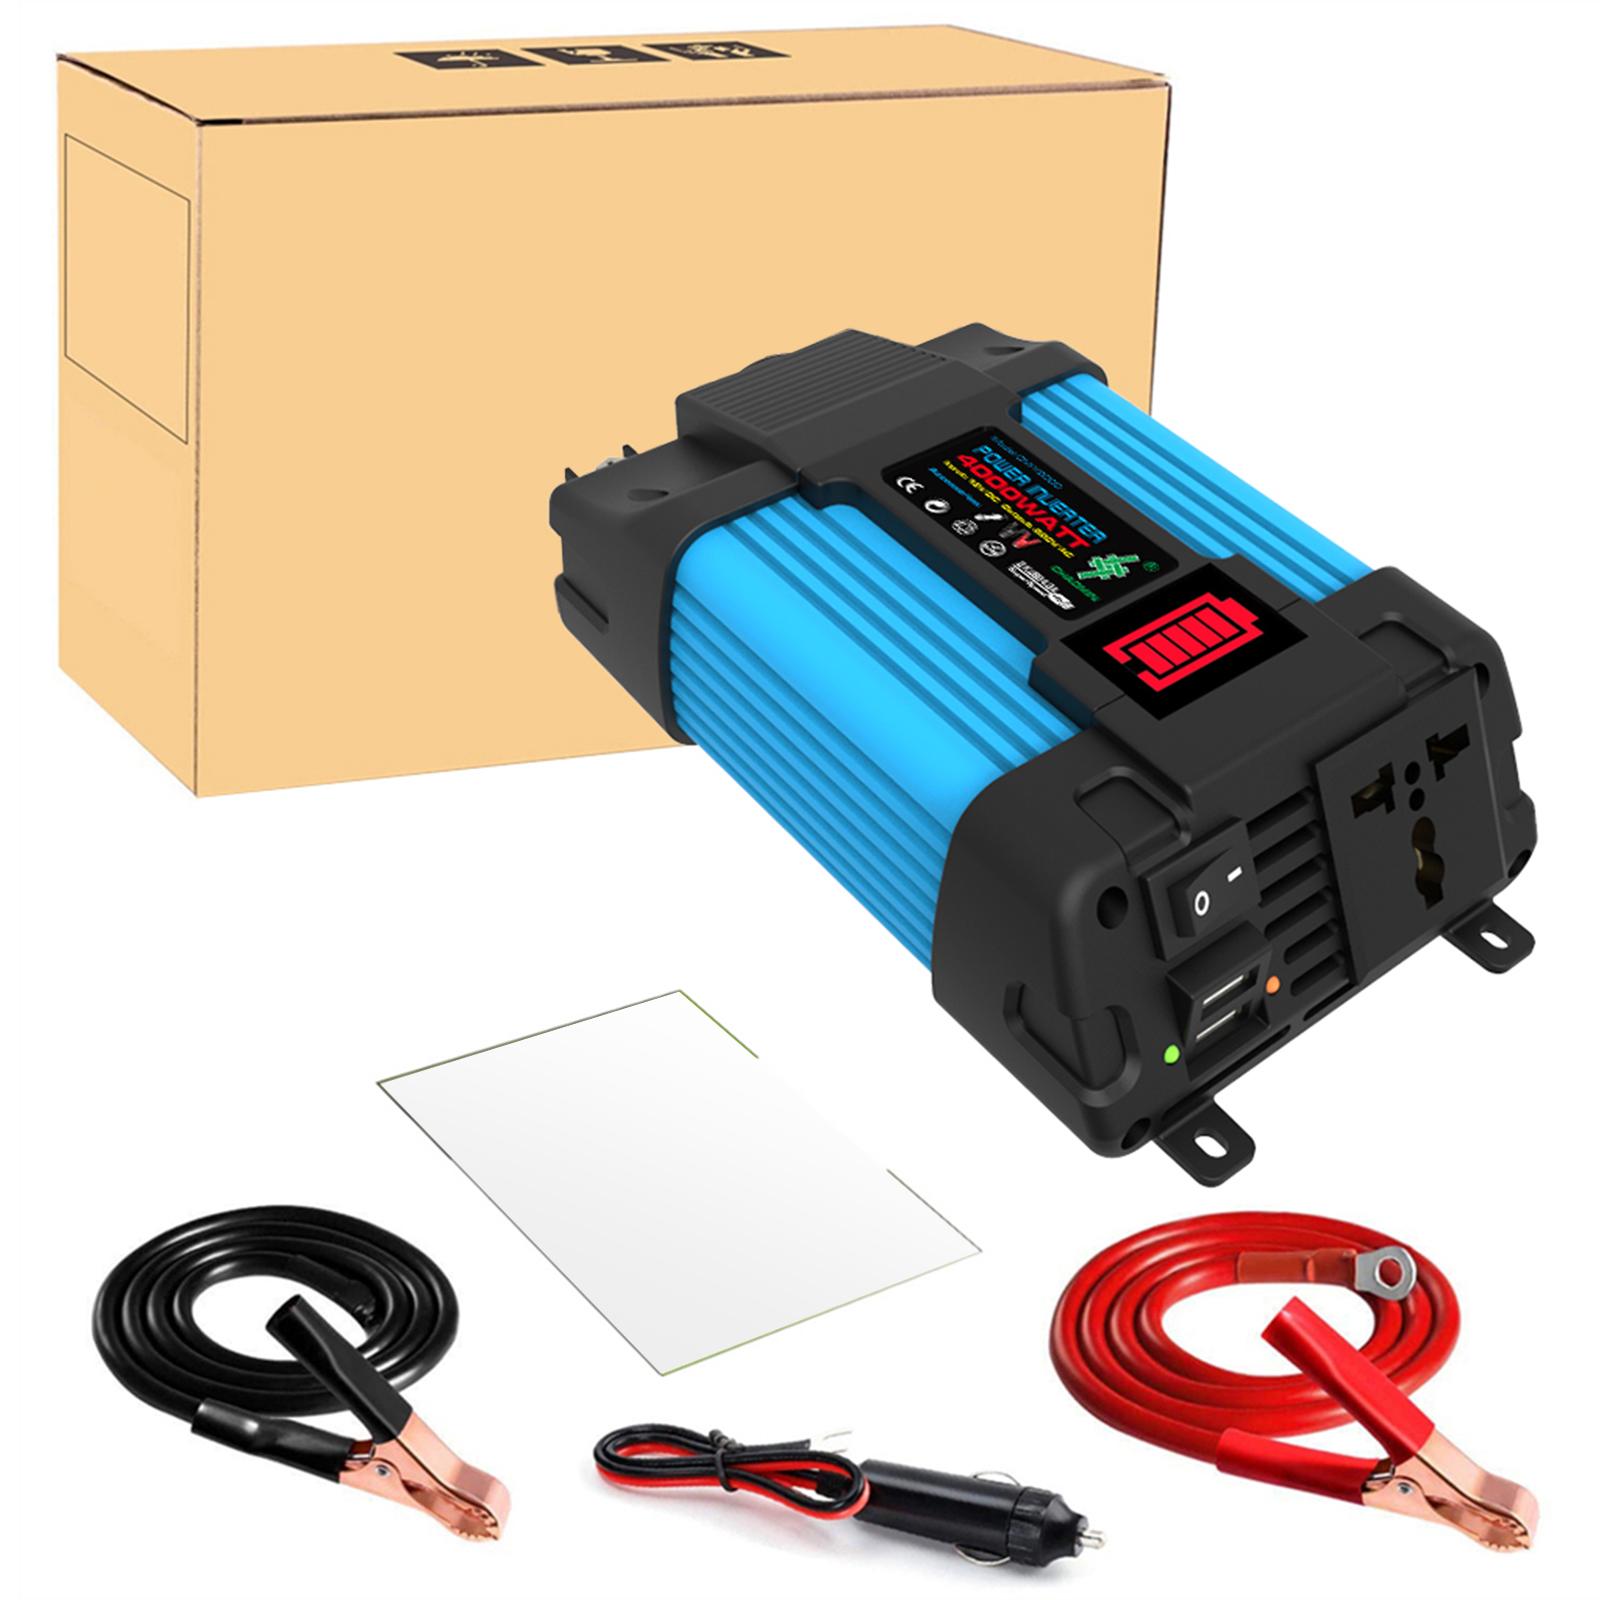 Car Power Inverter with Cigarette Lighter with AC Outlet for RV Outdoor DC12V to AC220V 300W